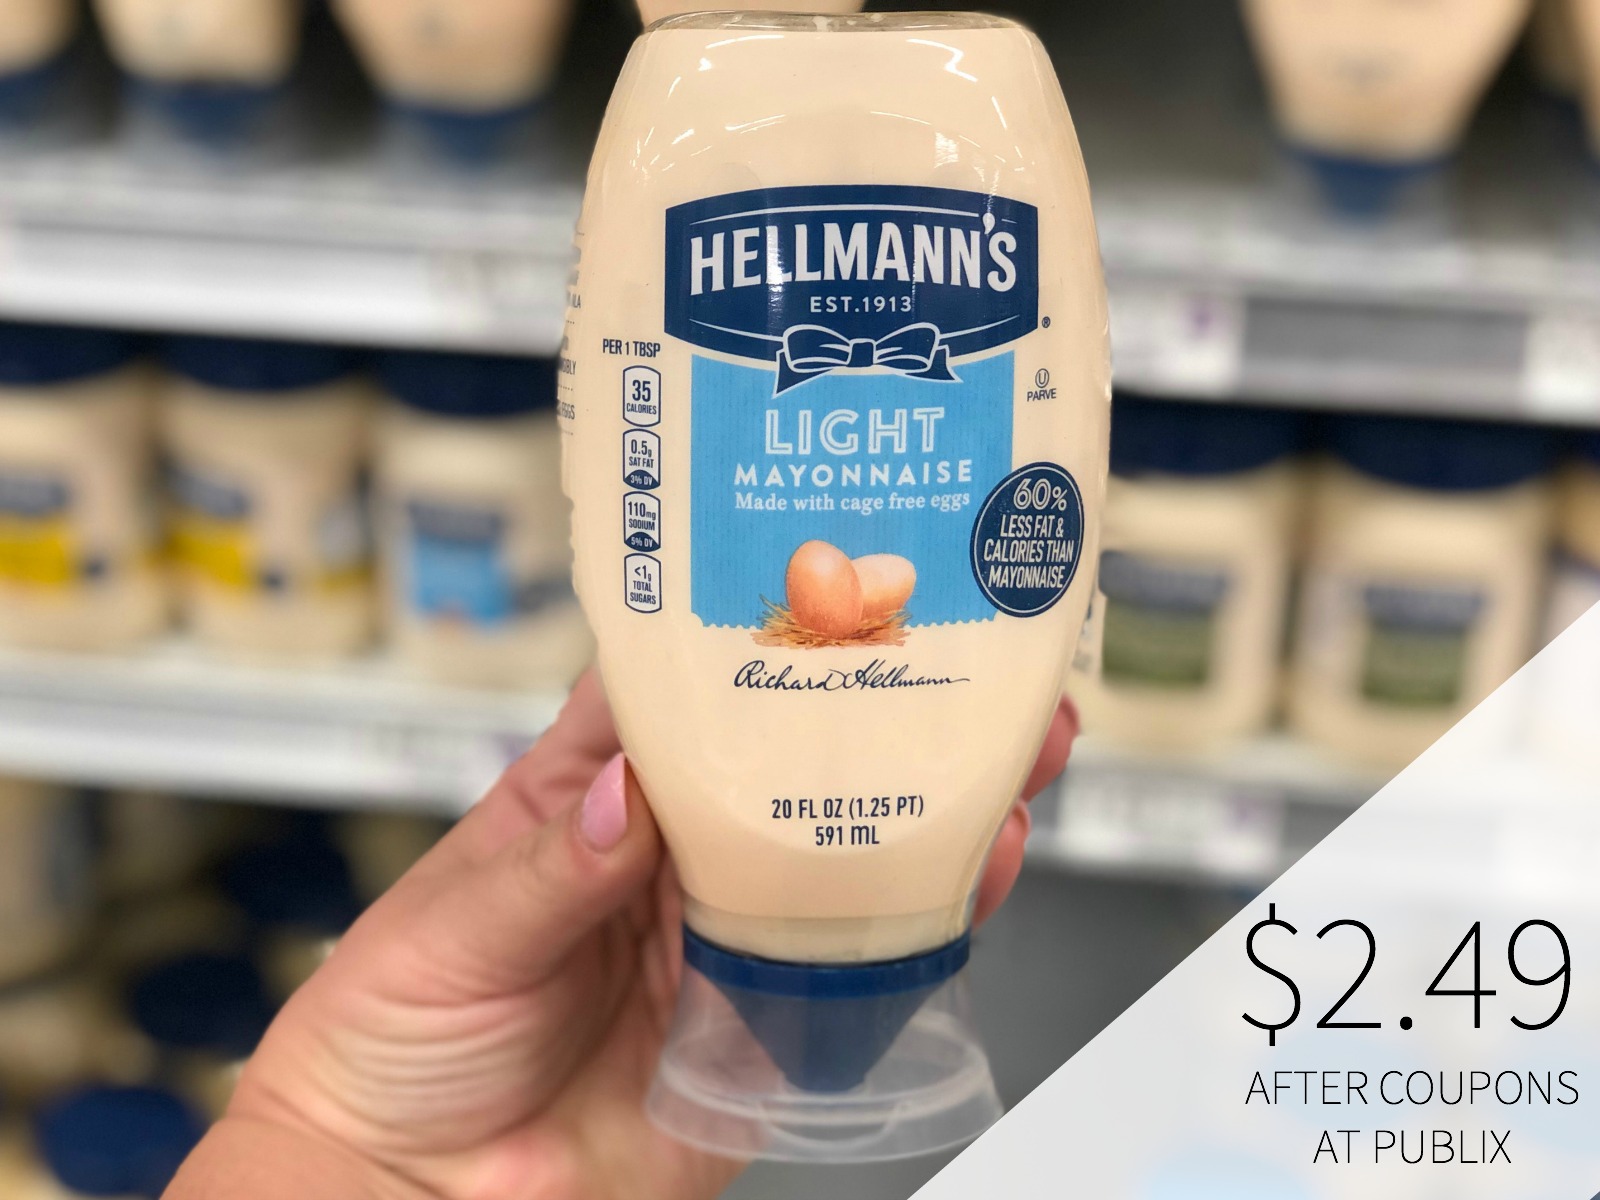 Save On Hellmann’s Mayonnaise At Publix With The New Publix Coupon!